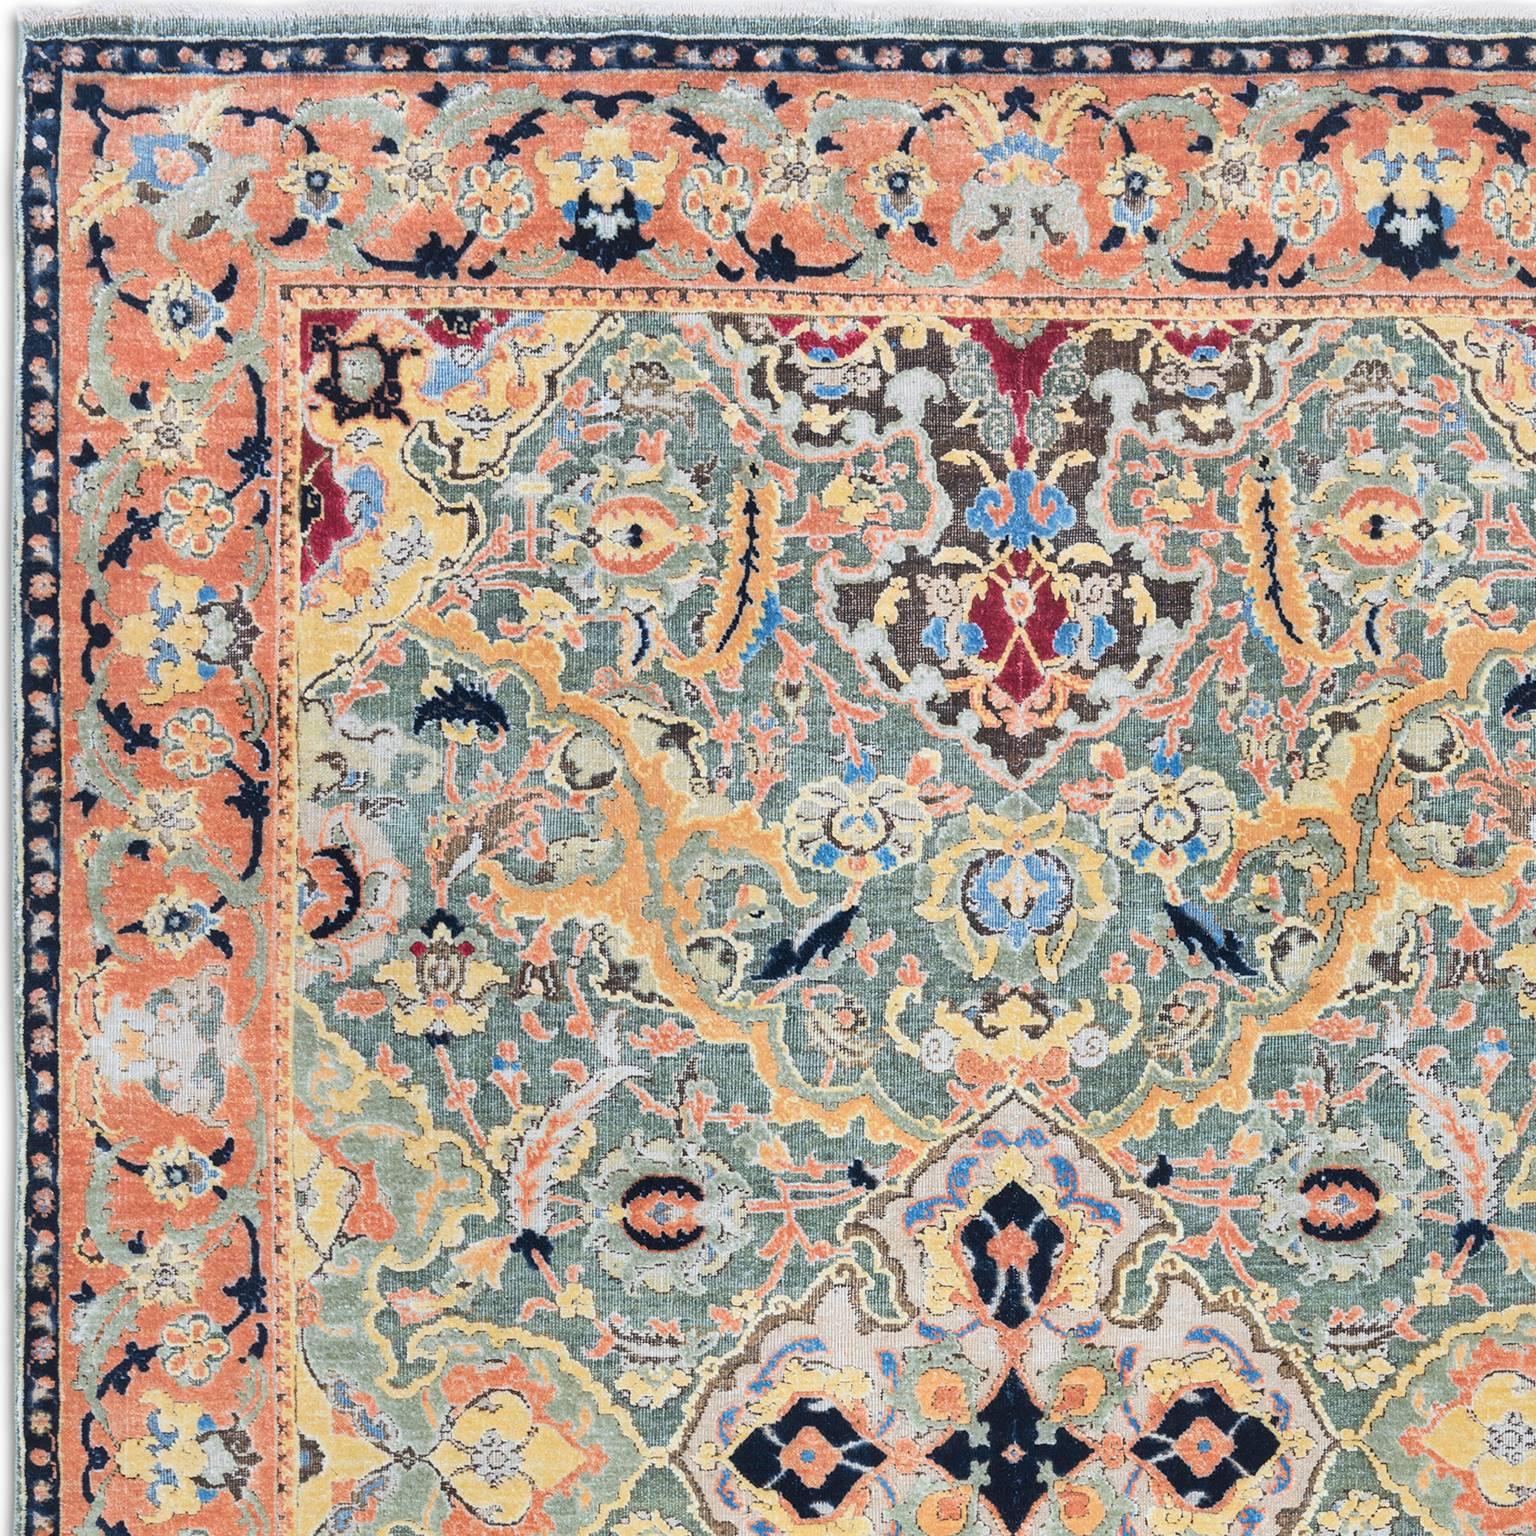 Knots Rugs presents the new '17th Century Modern_Polonaise No. 03'. Produced in Jaipur in 11/11 Persian knot quality from oxidized wool and silk.
This piece is number 1/10 of this special Limited Edition collection produced by Knots rugs. The